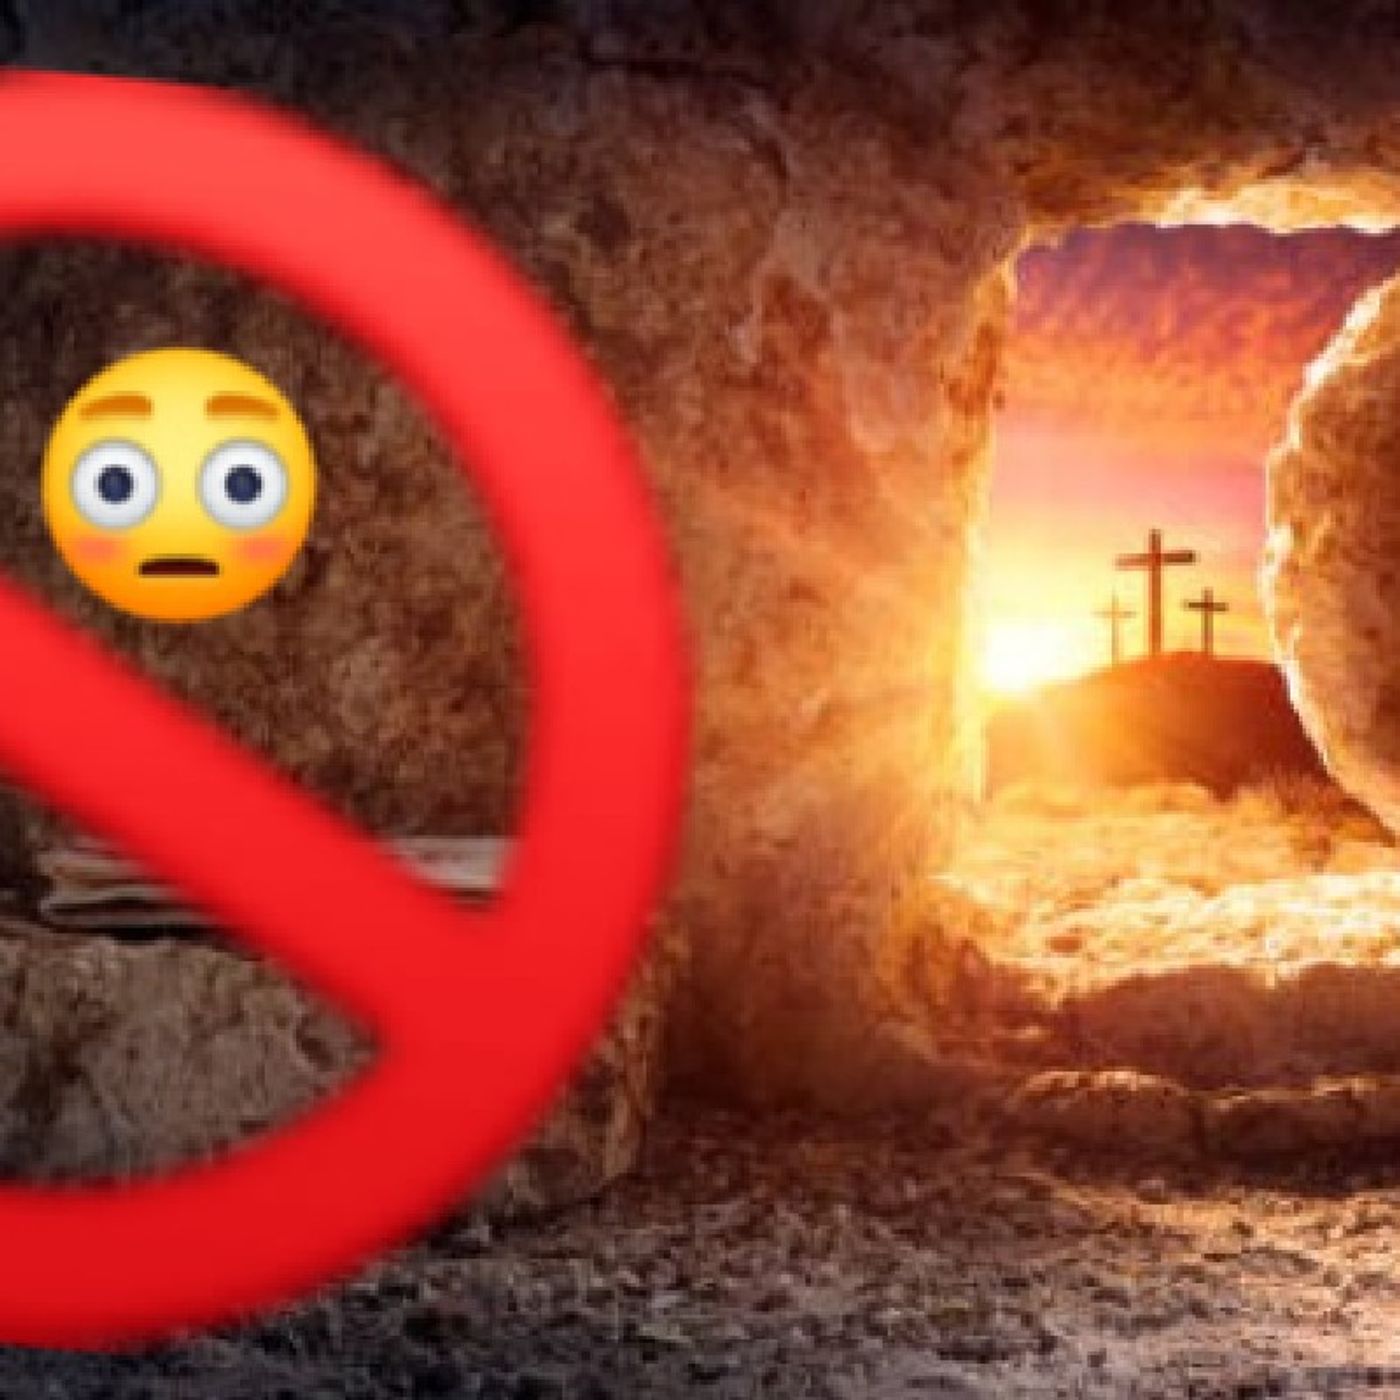 What If The Resurrection Of Jesus Never Happened?